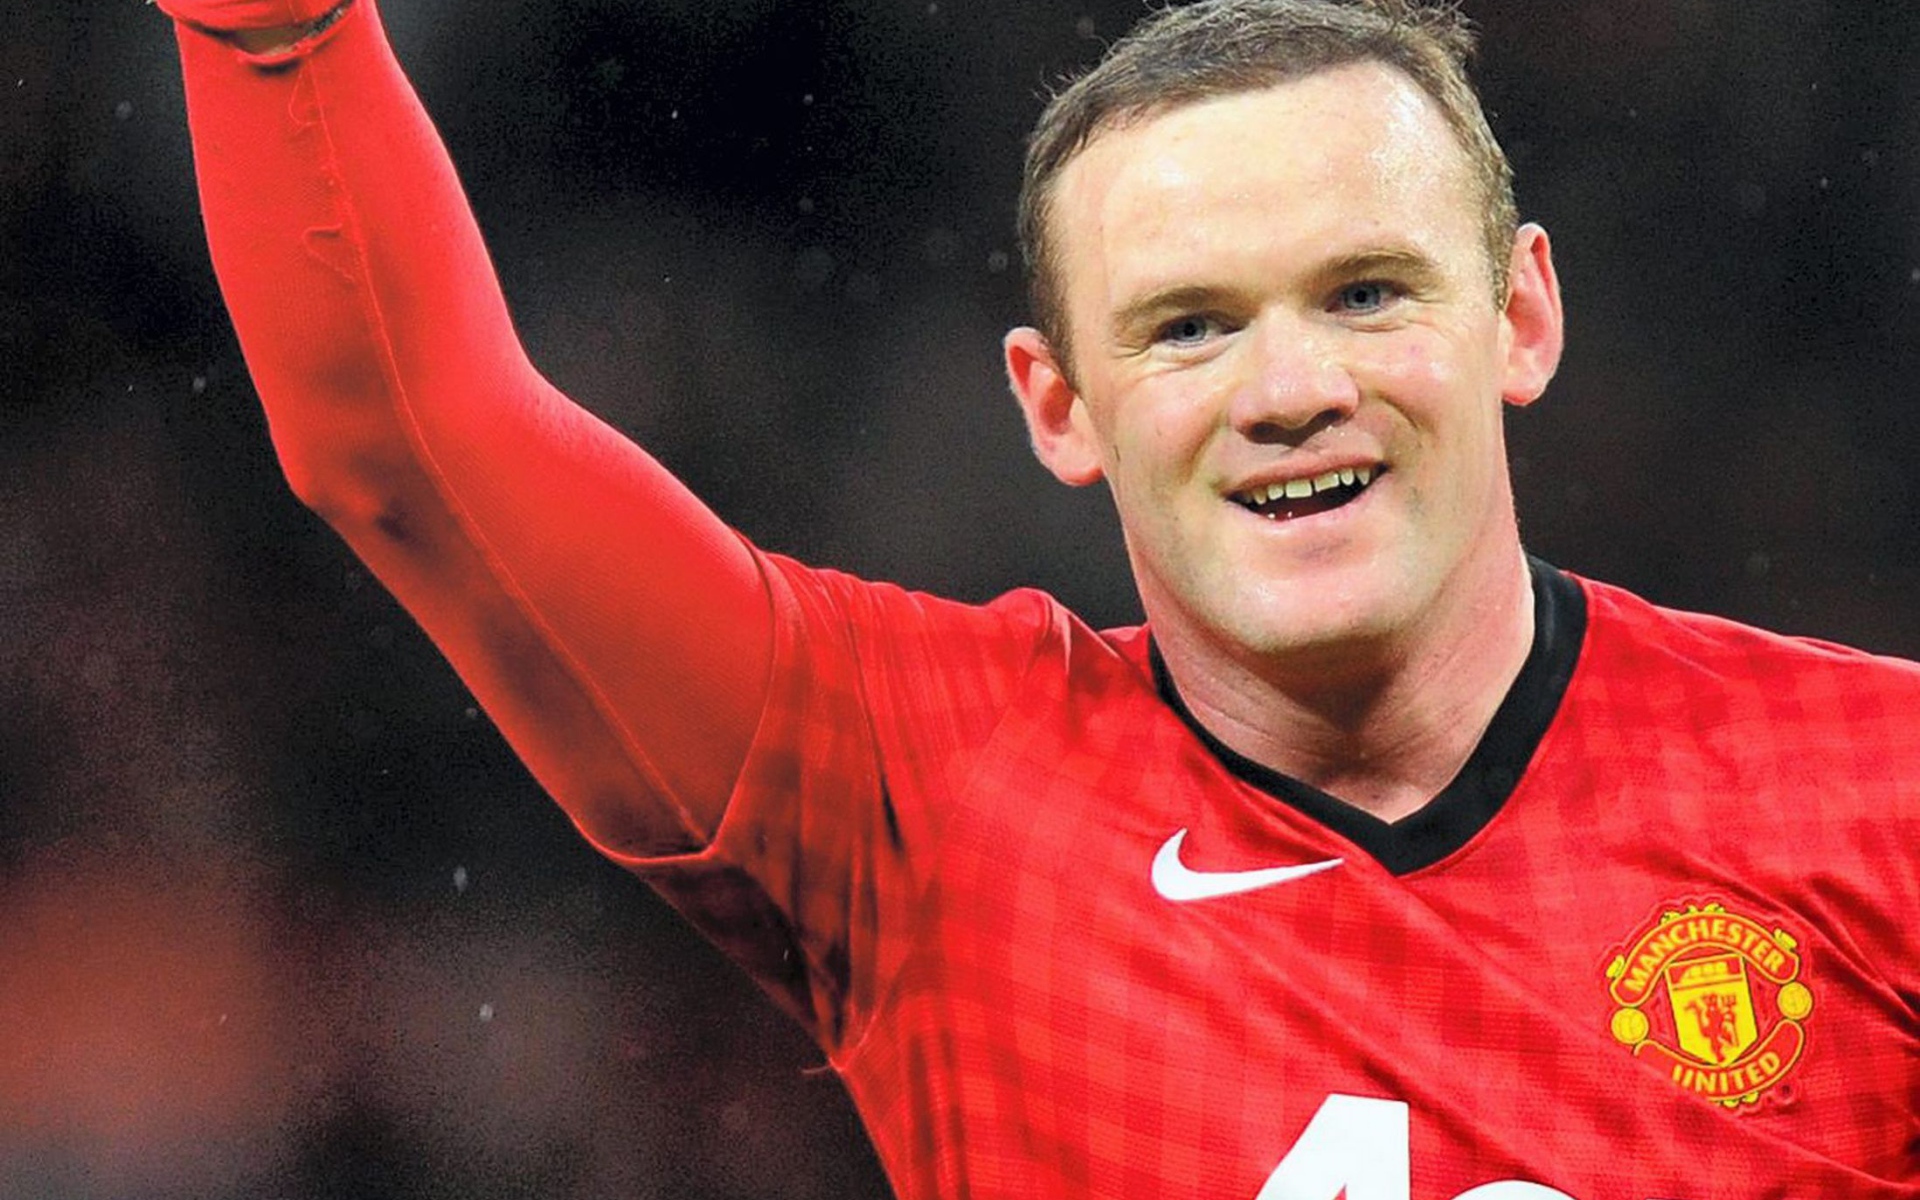 The forward of Manchester United Wayne Rooney on the field